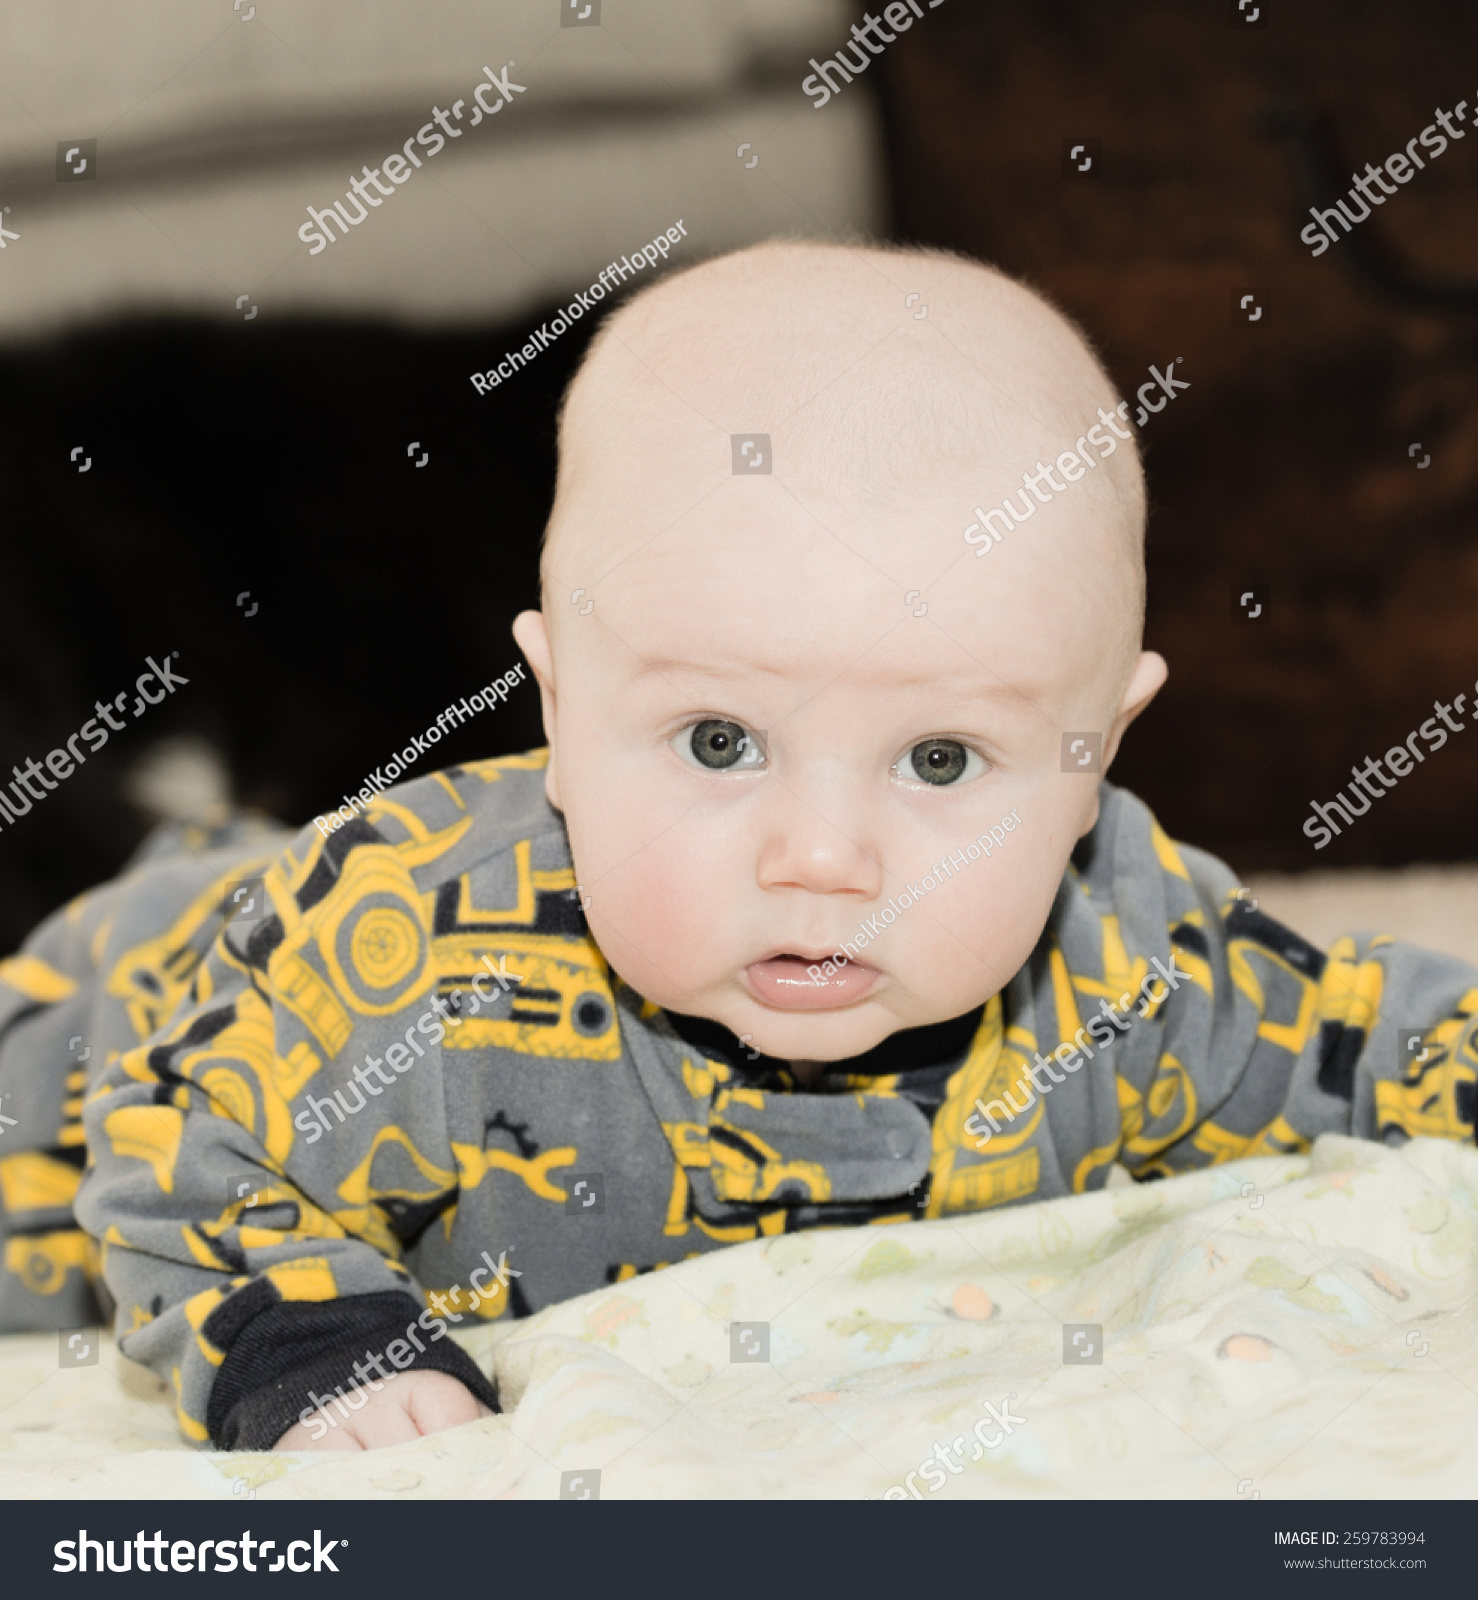 Baby looks around during <b>timmy time</b>! - stock-photo-baby-looks-around-during-timmy-time-259783994